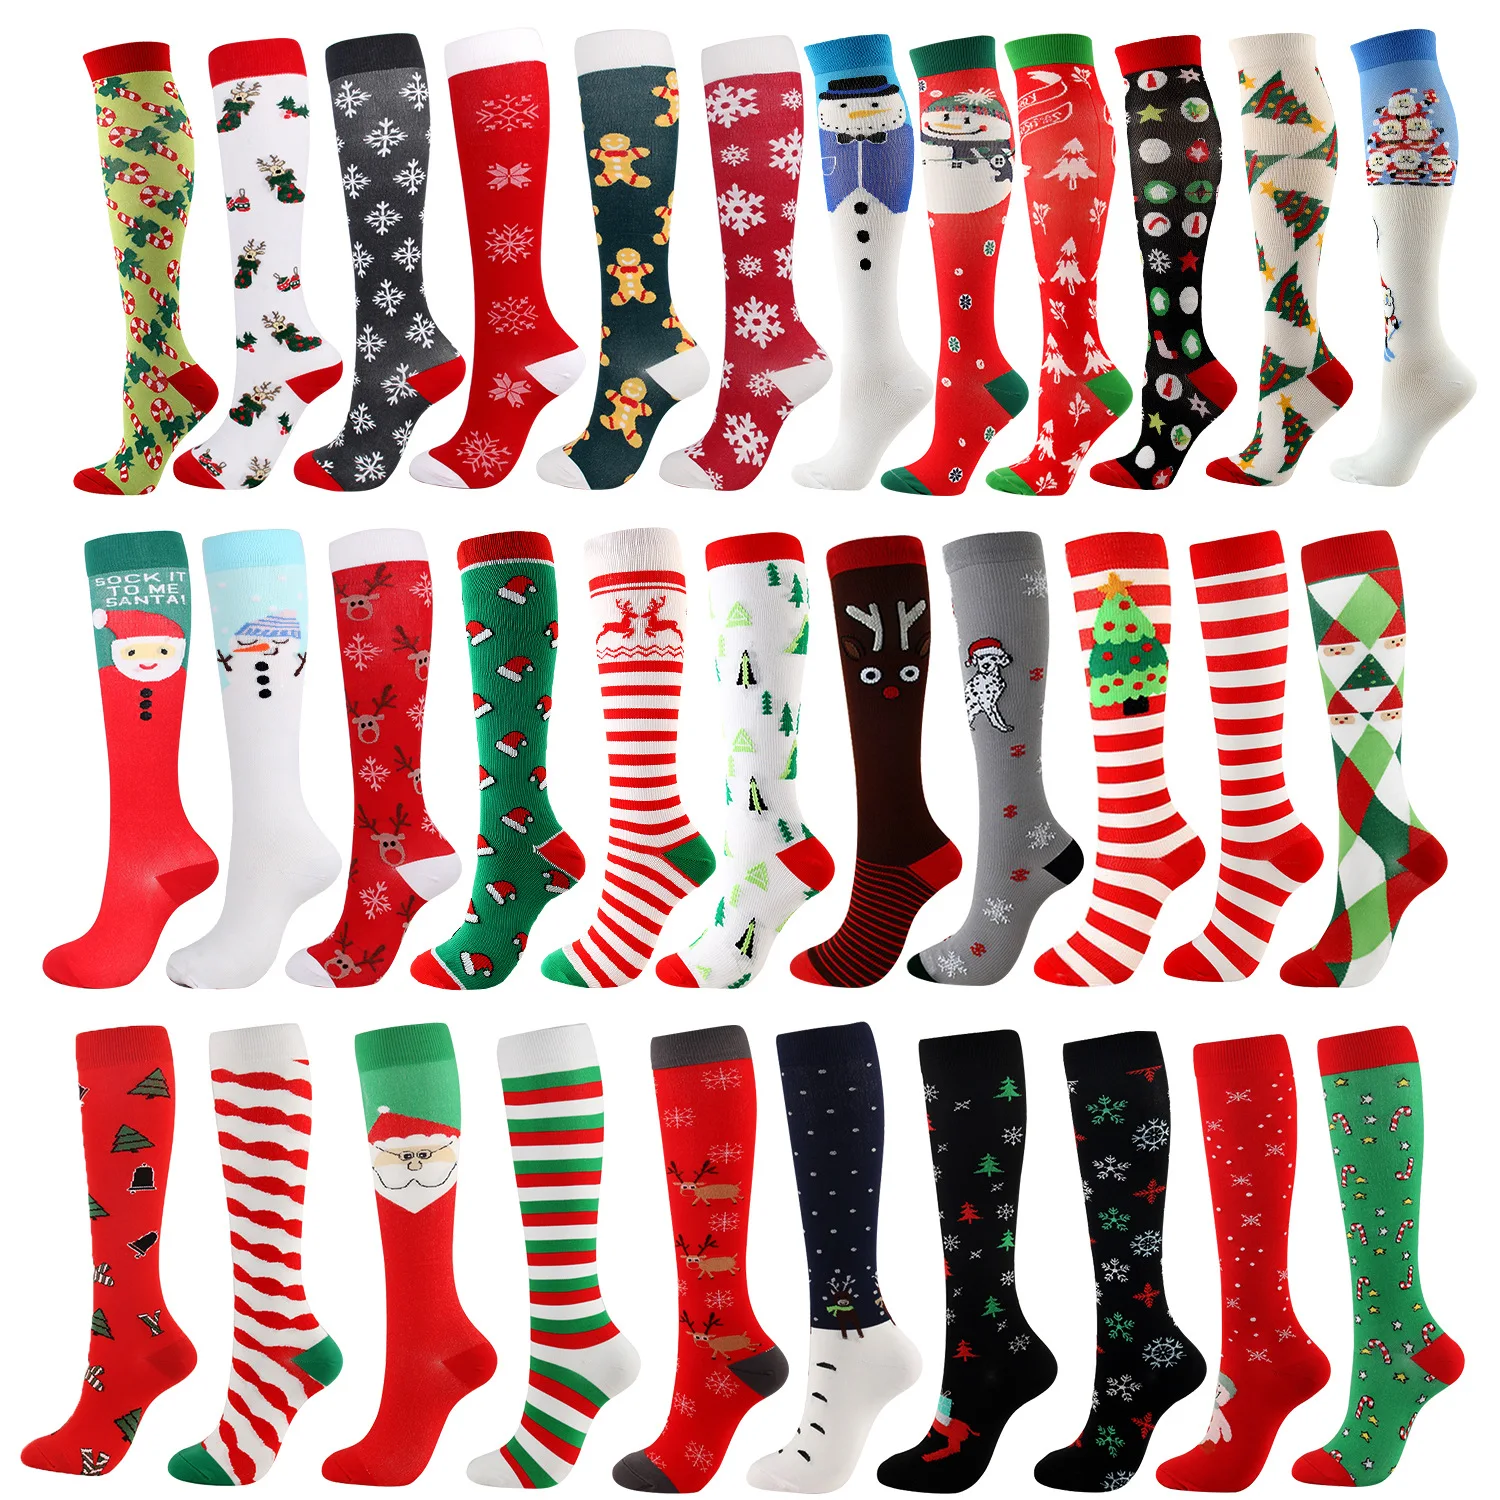 Happy Colorful Style Medical Compression Socks Stockings for Men Women Holiday Gift Sports Christmas Compression Socks